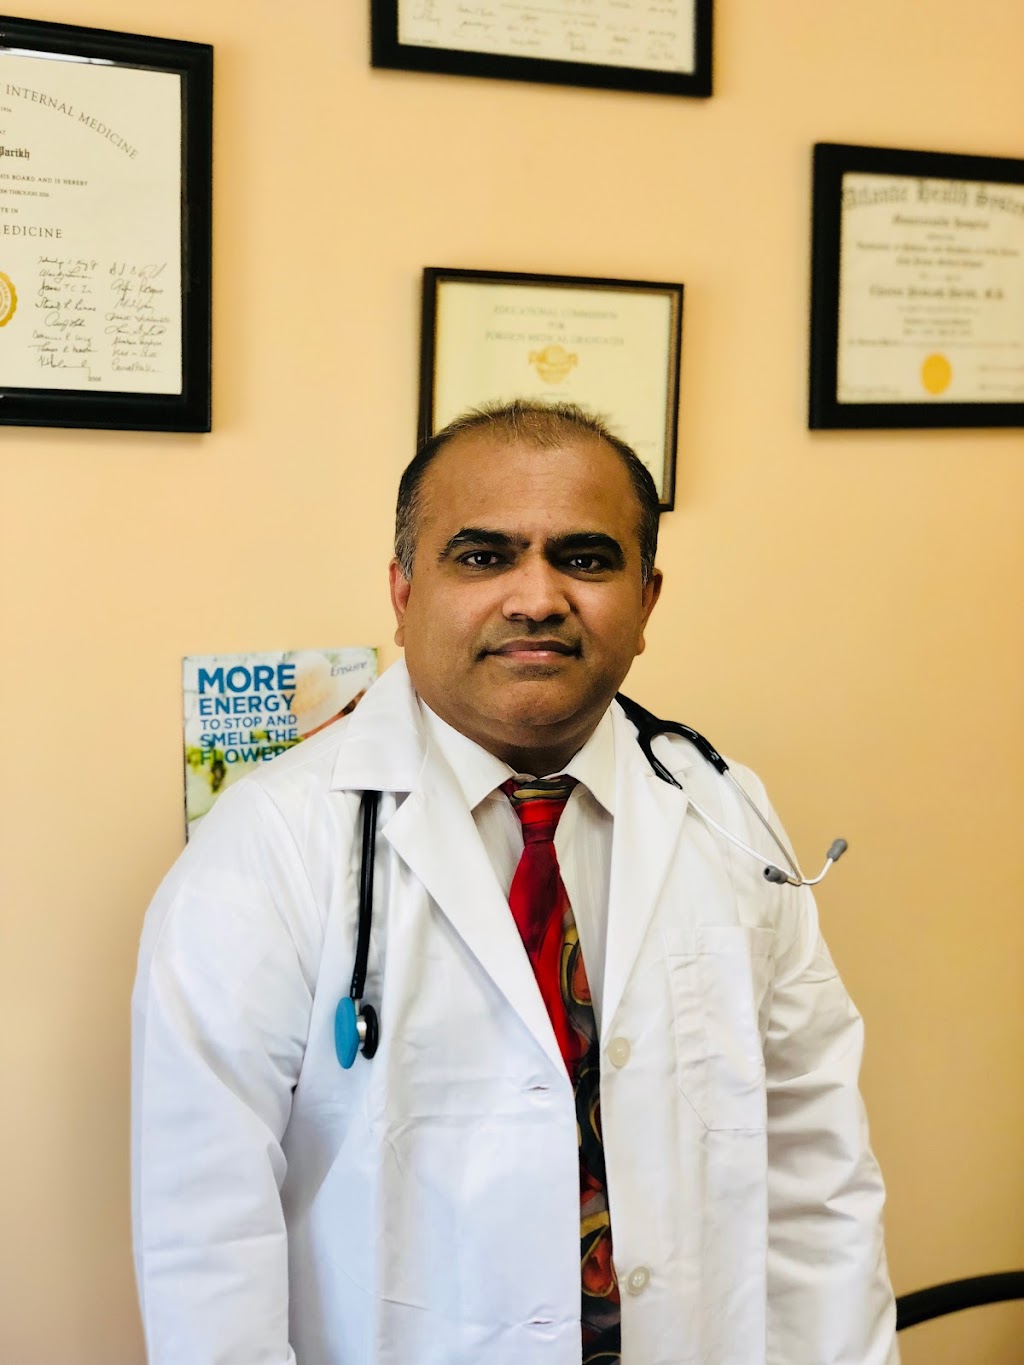 CP PRIMARYCARE PC. CHINTAN PARIKH MD | 206 Belleville Ave suite 204-a, Bloomfield, NJ 07003 | Phone: (973) 680-9800